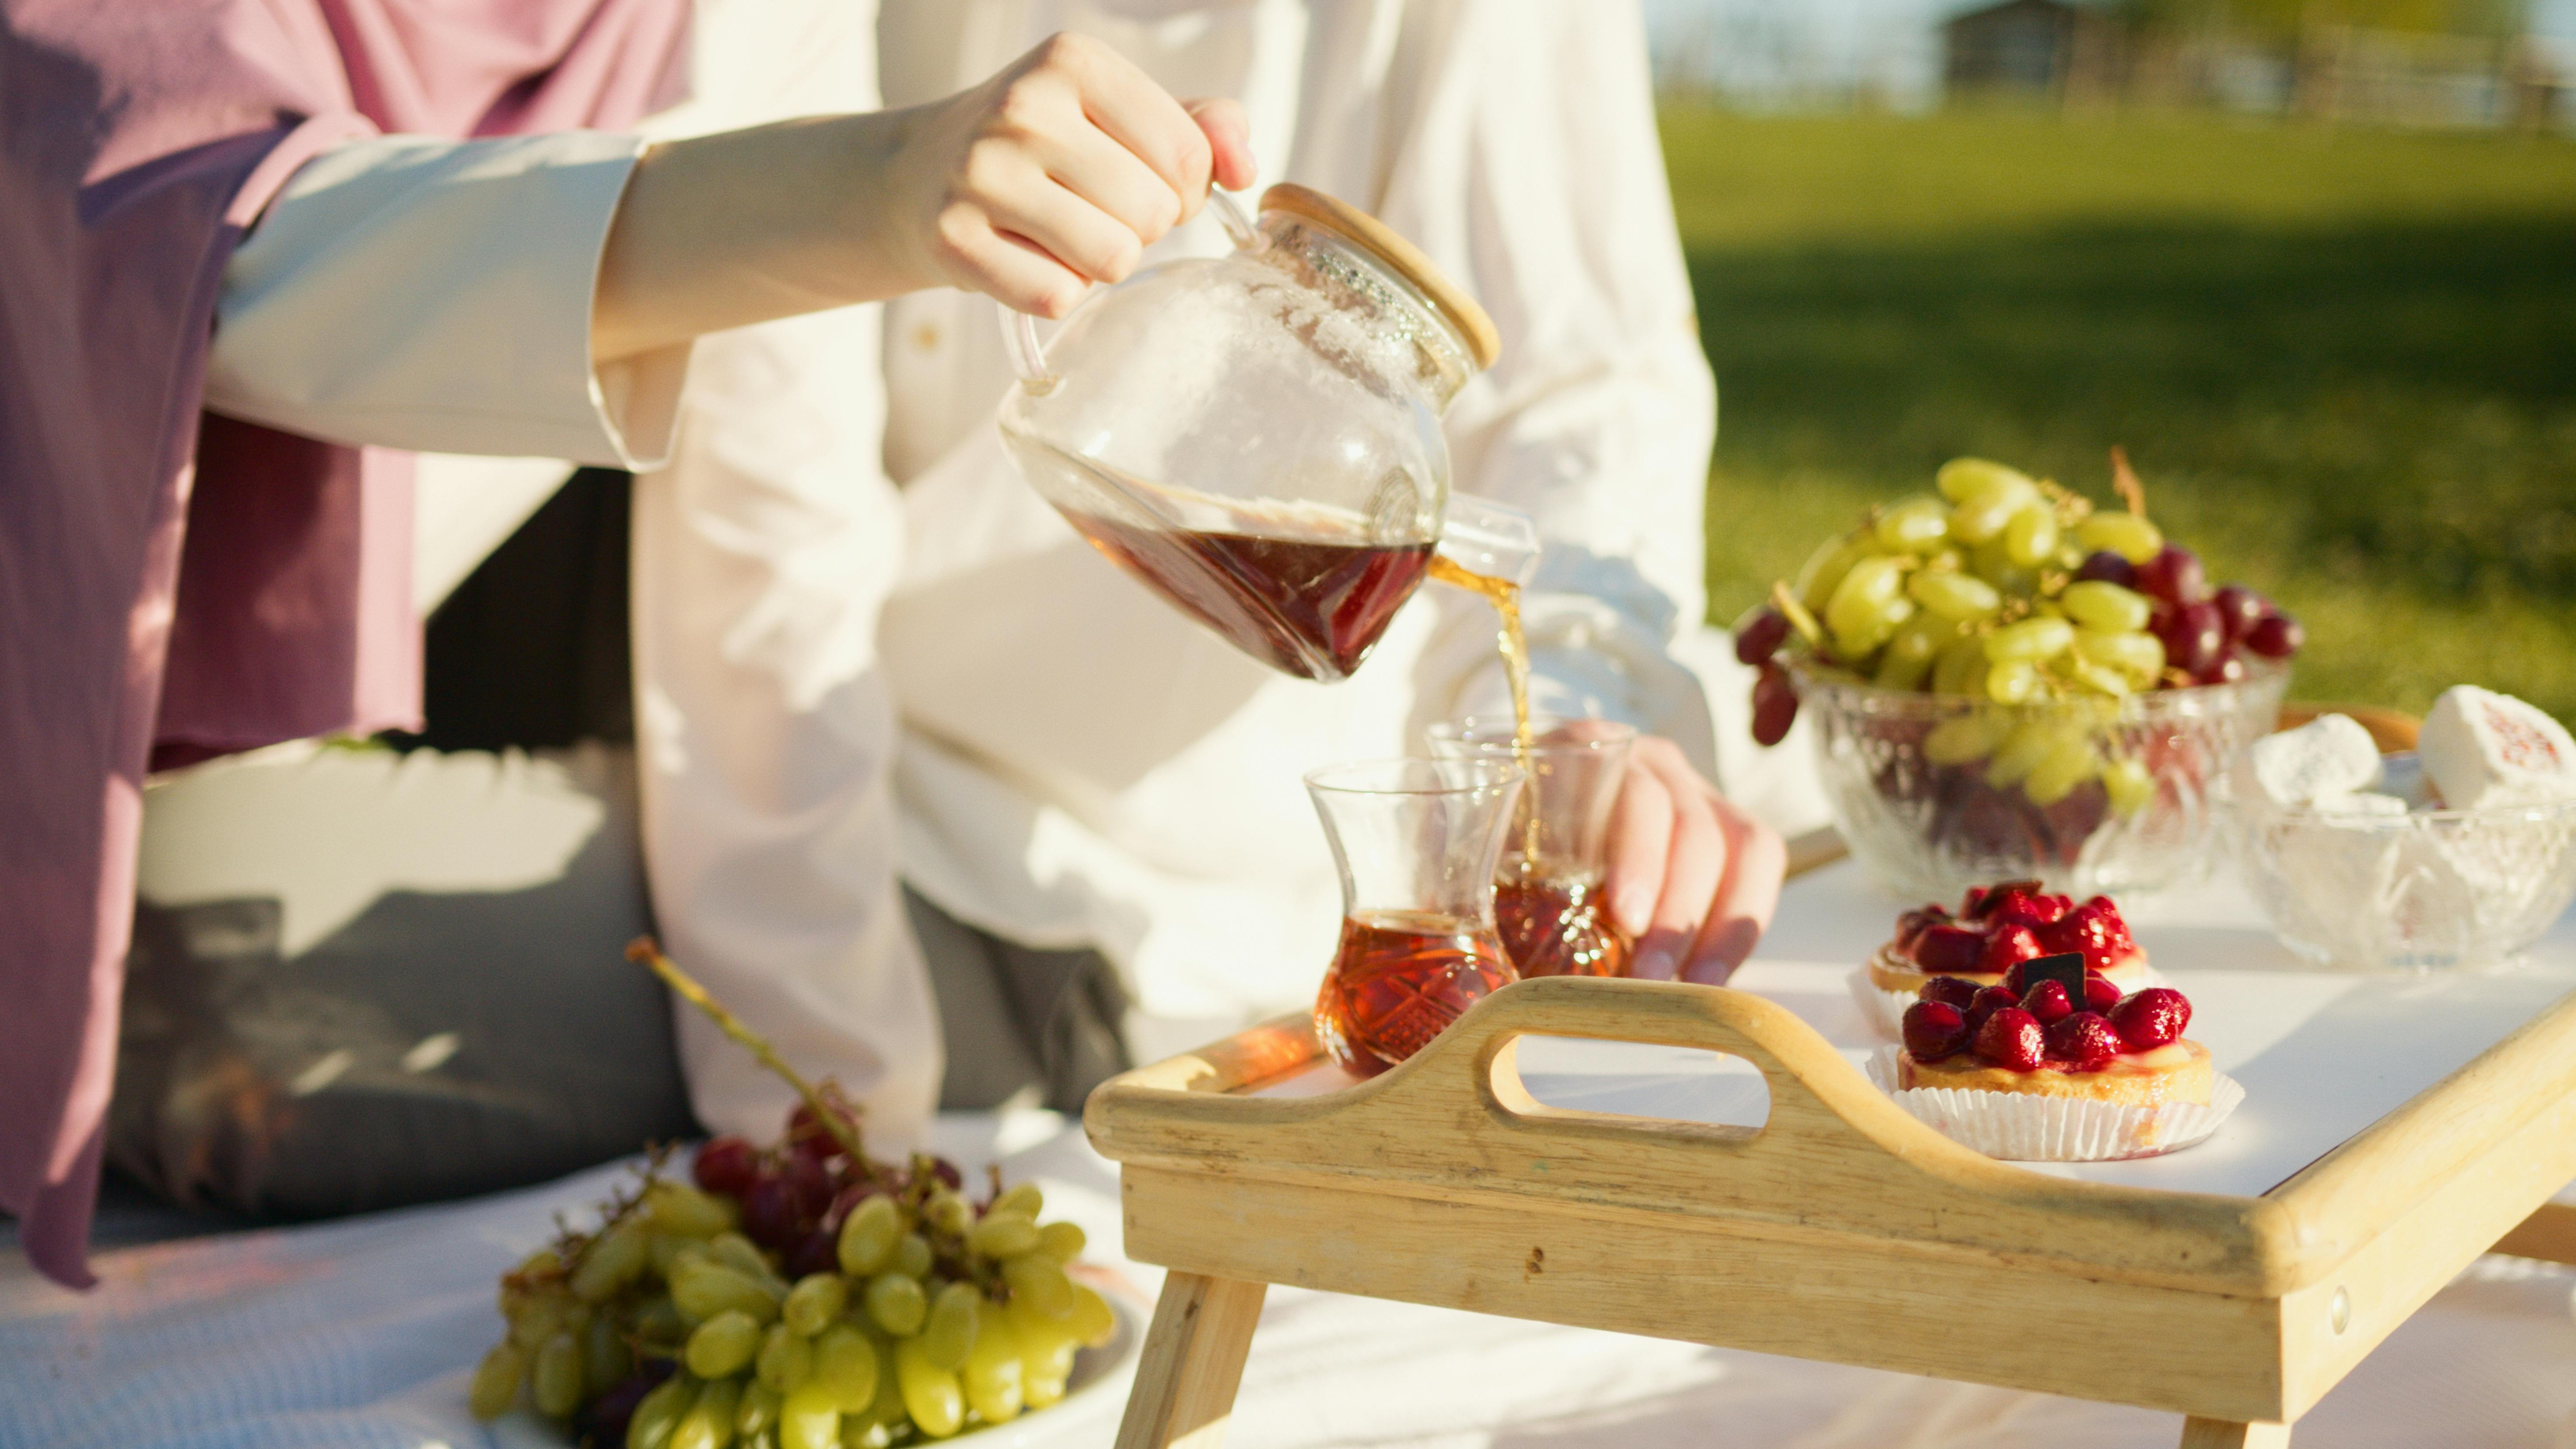 person pouring coffee into clear glass, grapes and pastries on wooden tray